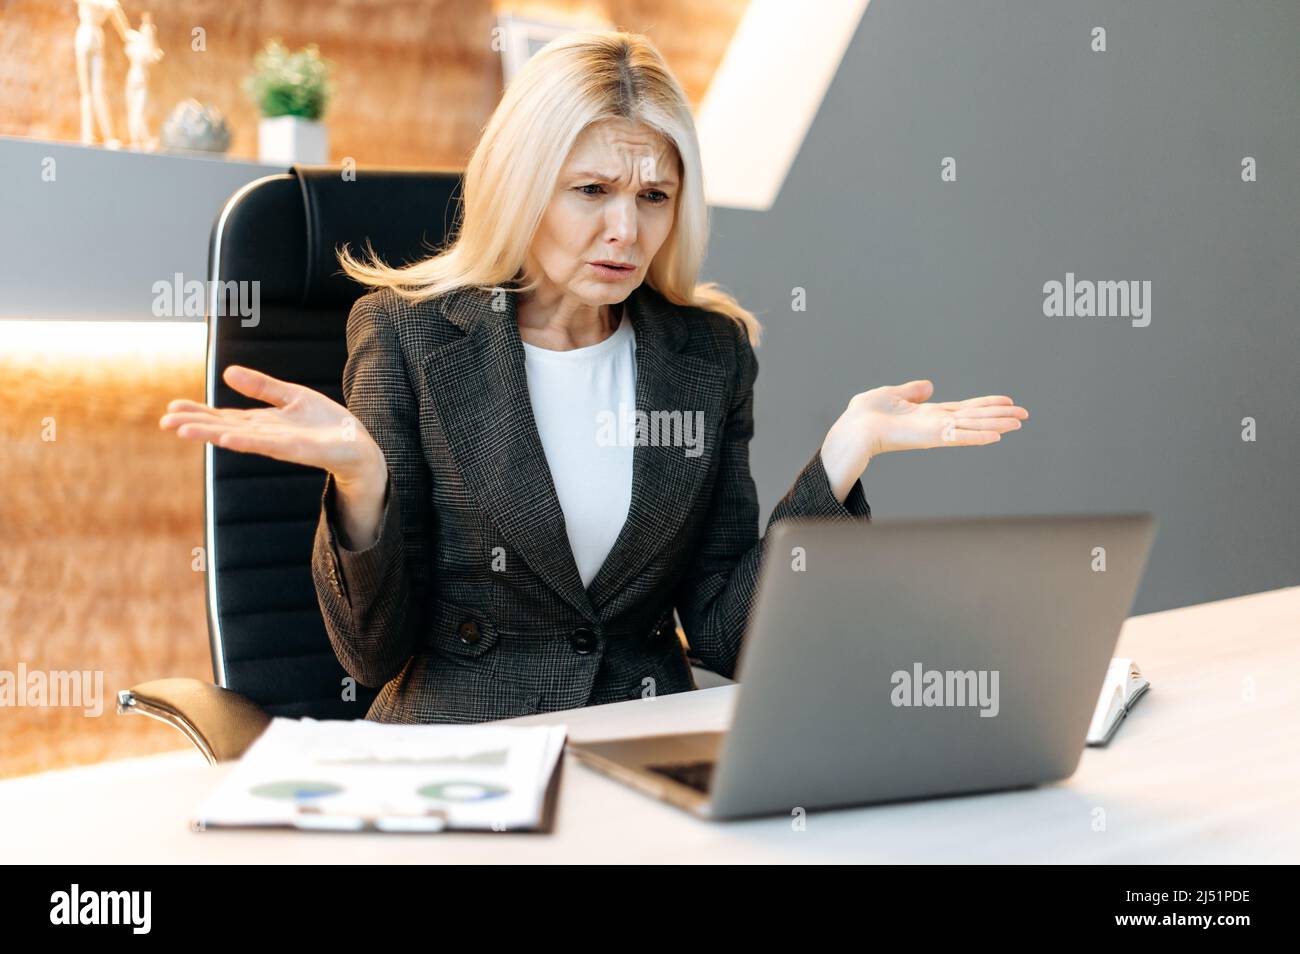 Discouraged upset middle aged blonde business woman, manager or broker, female executive, sit at the table in office, uses laptop, shocked by news or message, suffered financial loss,dissatisfied face Stock Photo